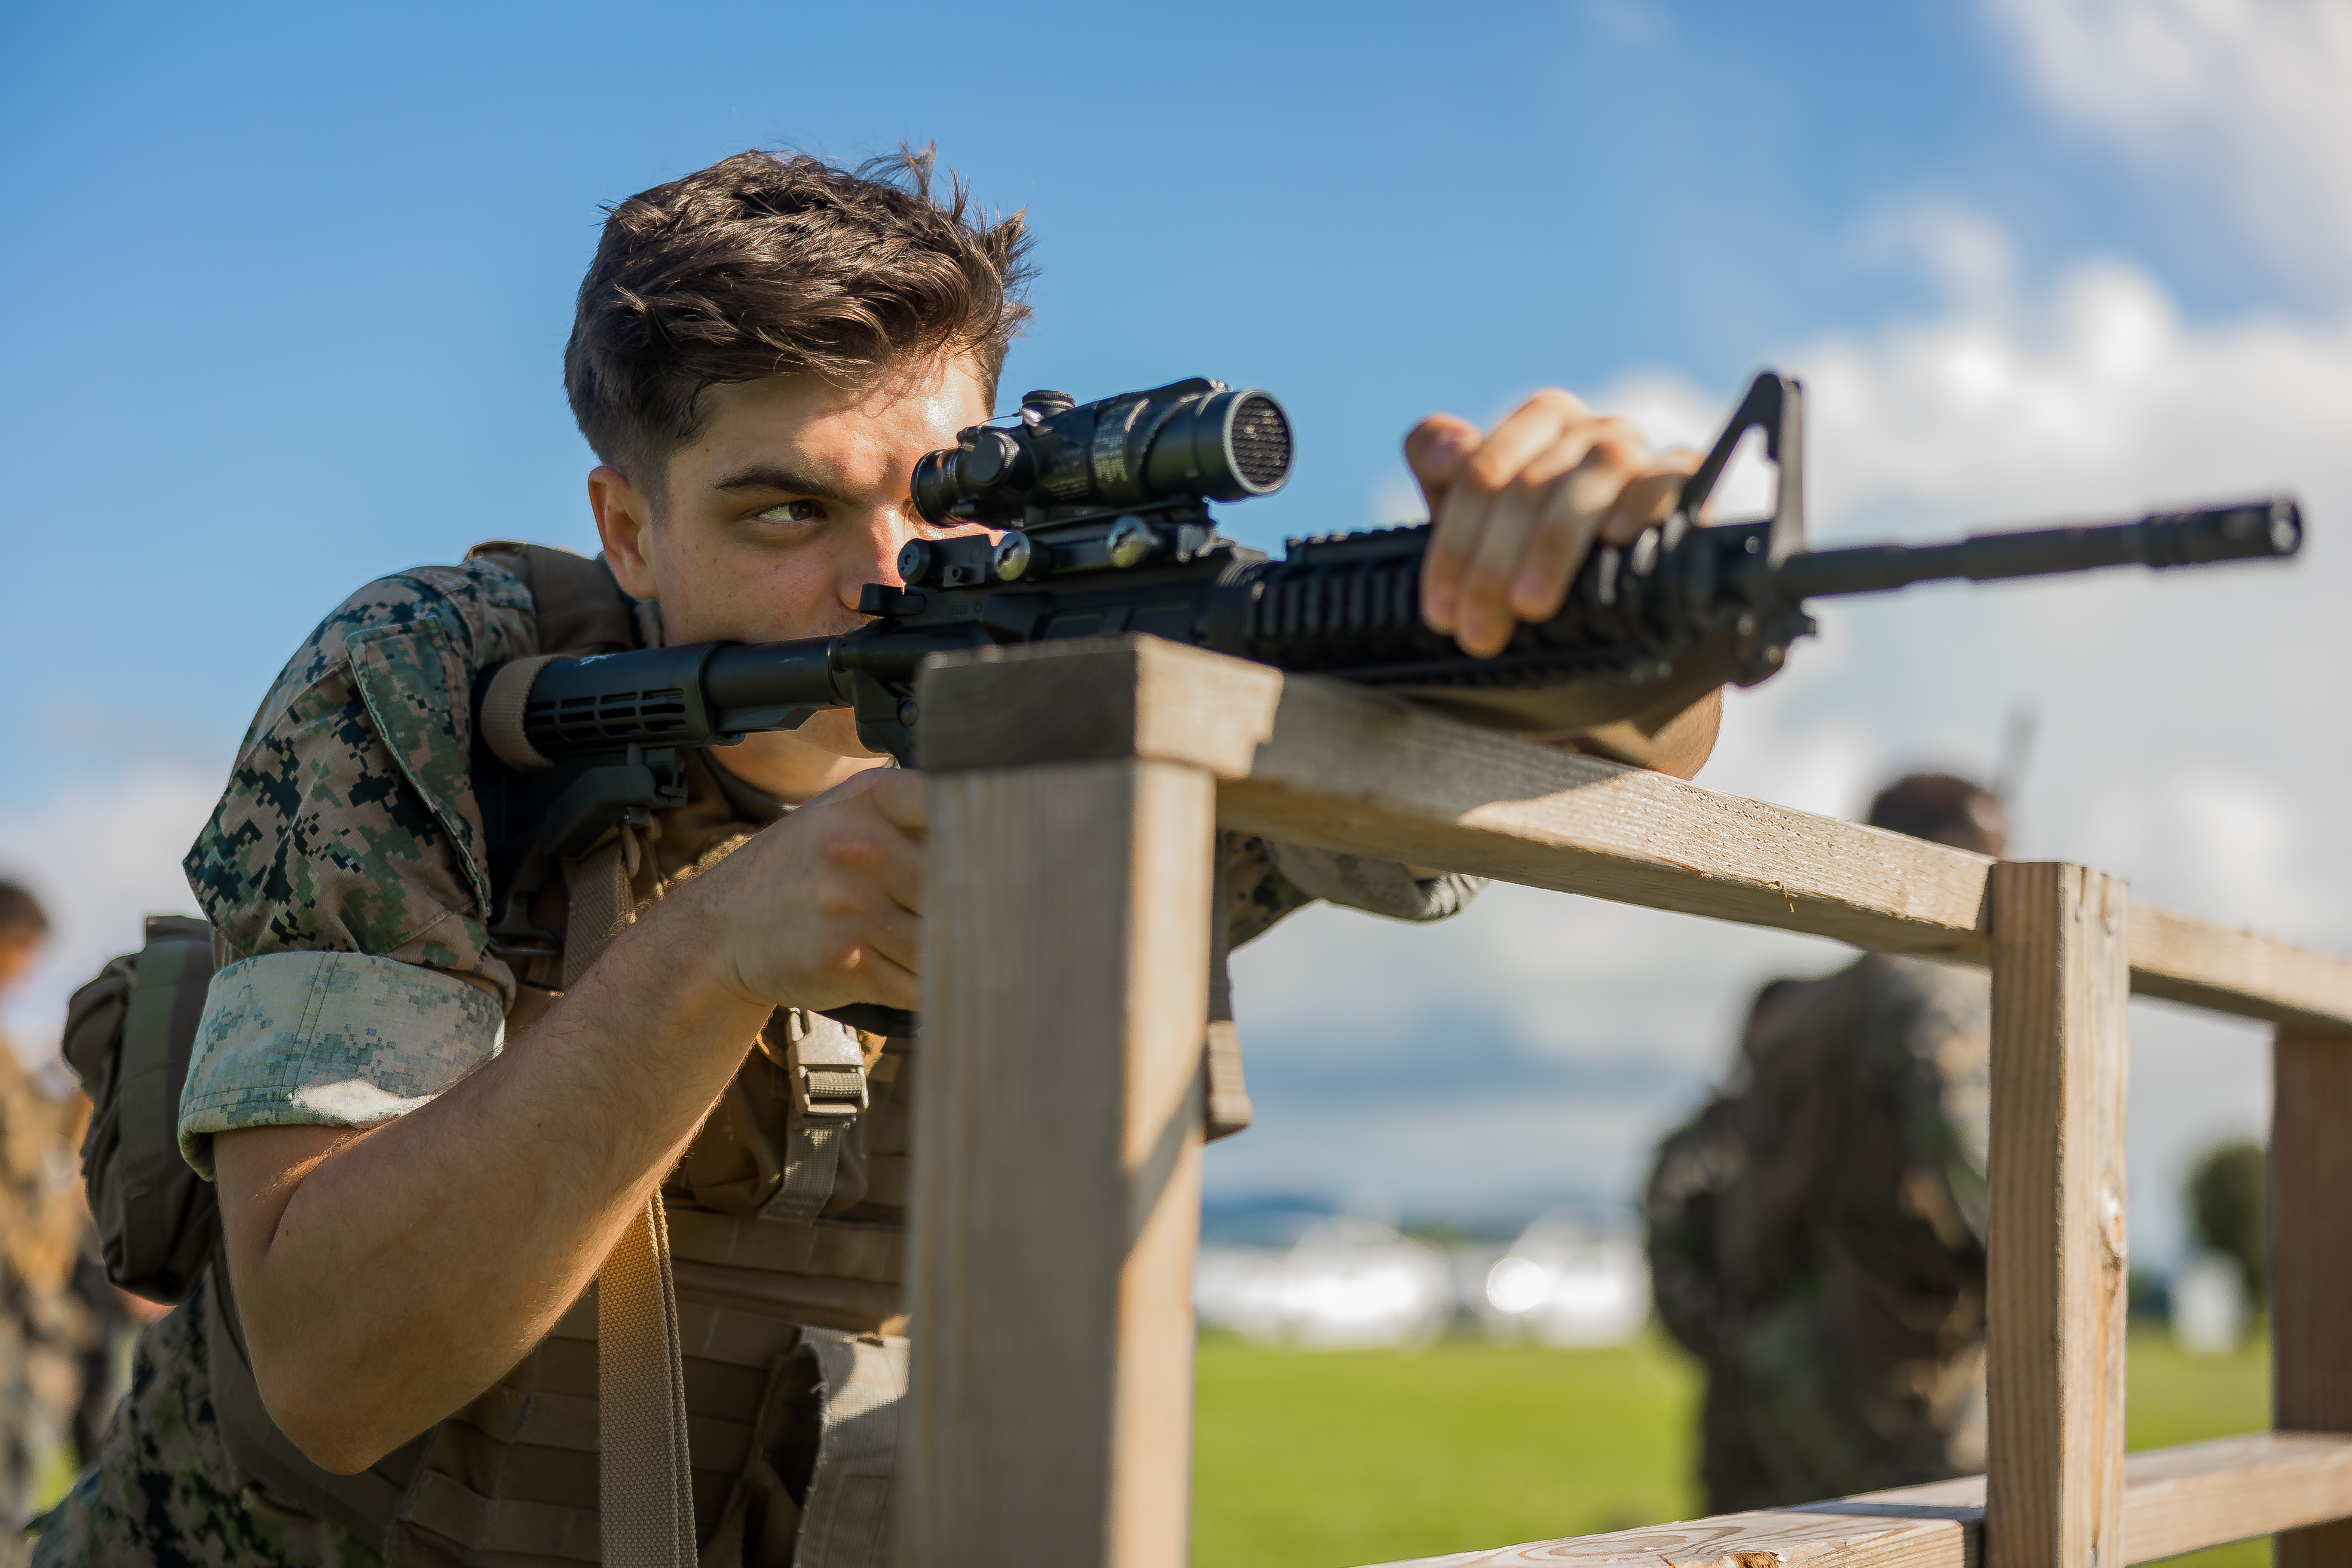 A U.S. Marine sights in with an M4 carbine during an annual rifle qualification grass week on Camp Courtney, Okinawa, Japan, Sept. 19, 2023. Grass week is a week-long course designated to practice and perform basic rifle fundamentals prior to qualifying for annual marksmanship. The Marine is with Headquarters Battalion, 3d Marine Division.